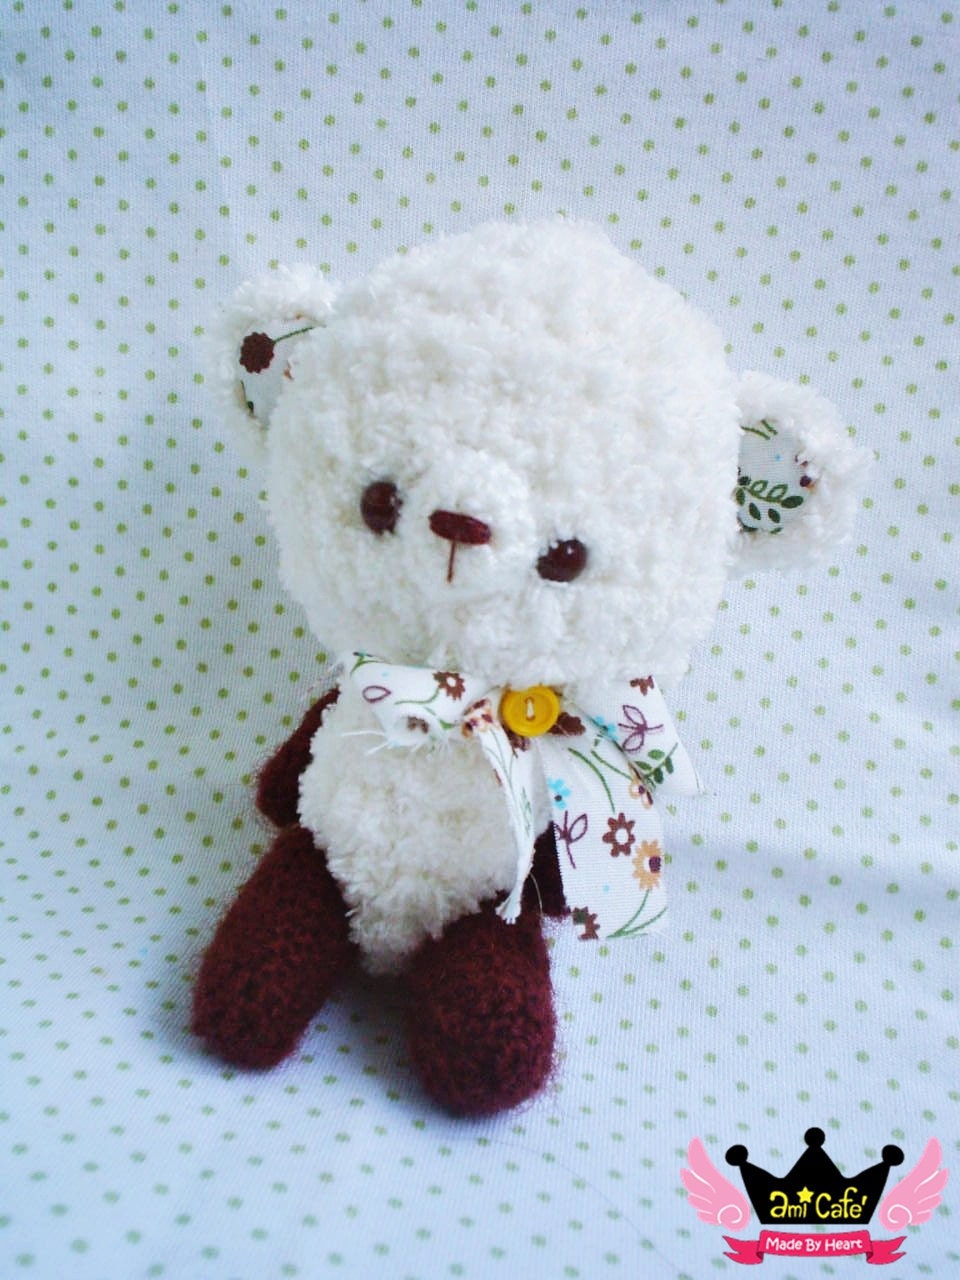 Brownie - Cotton Candy Amigurumi bear by Ami Cafe' - READY TO SHIP